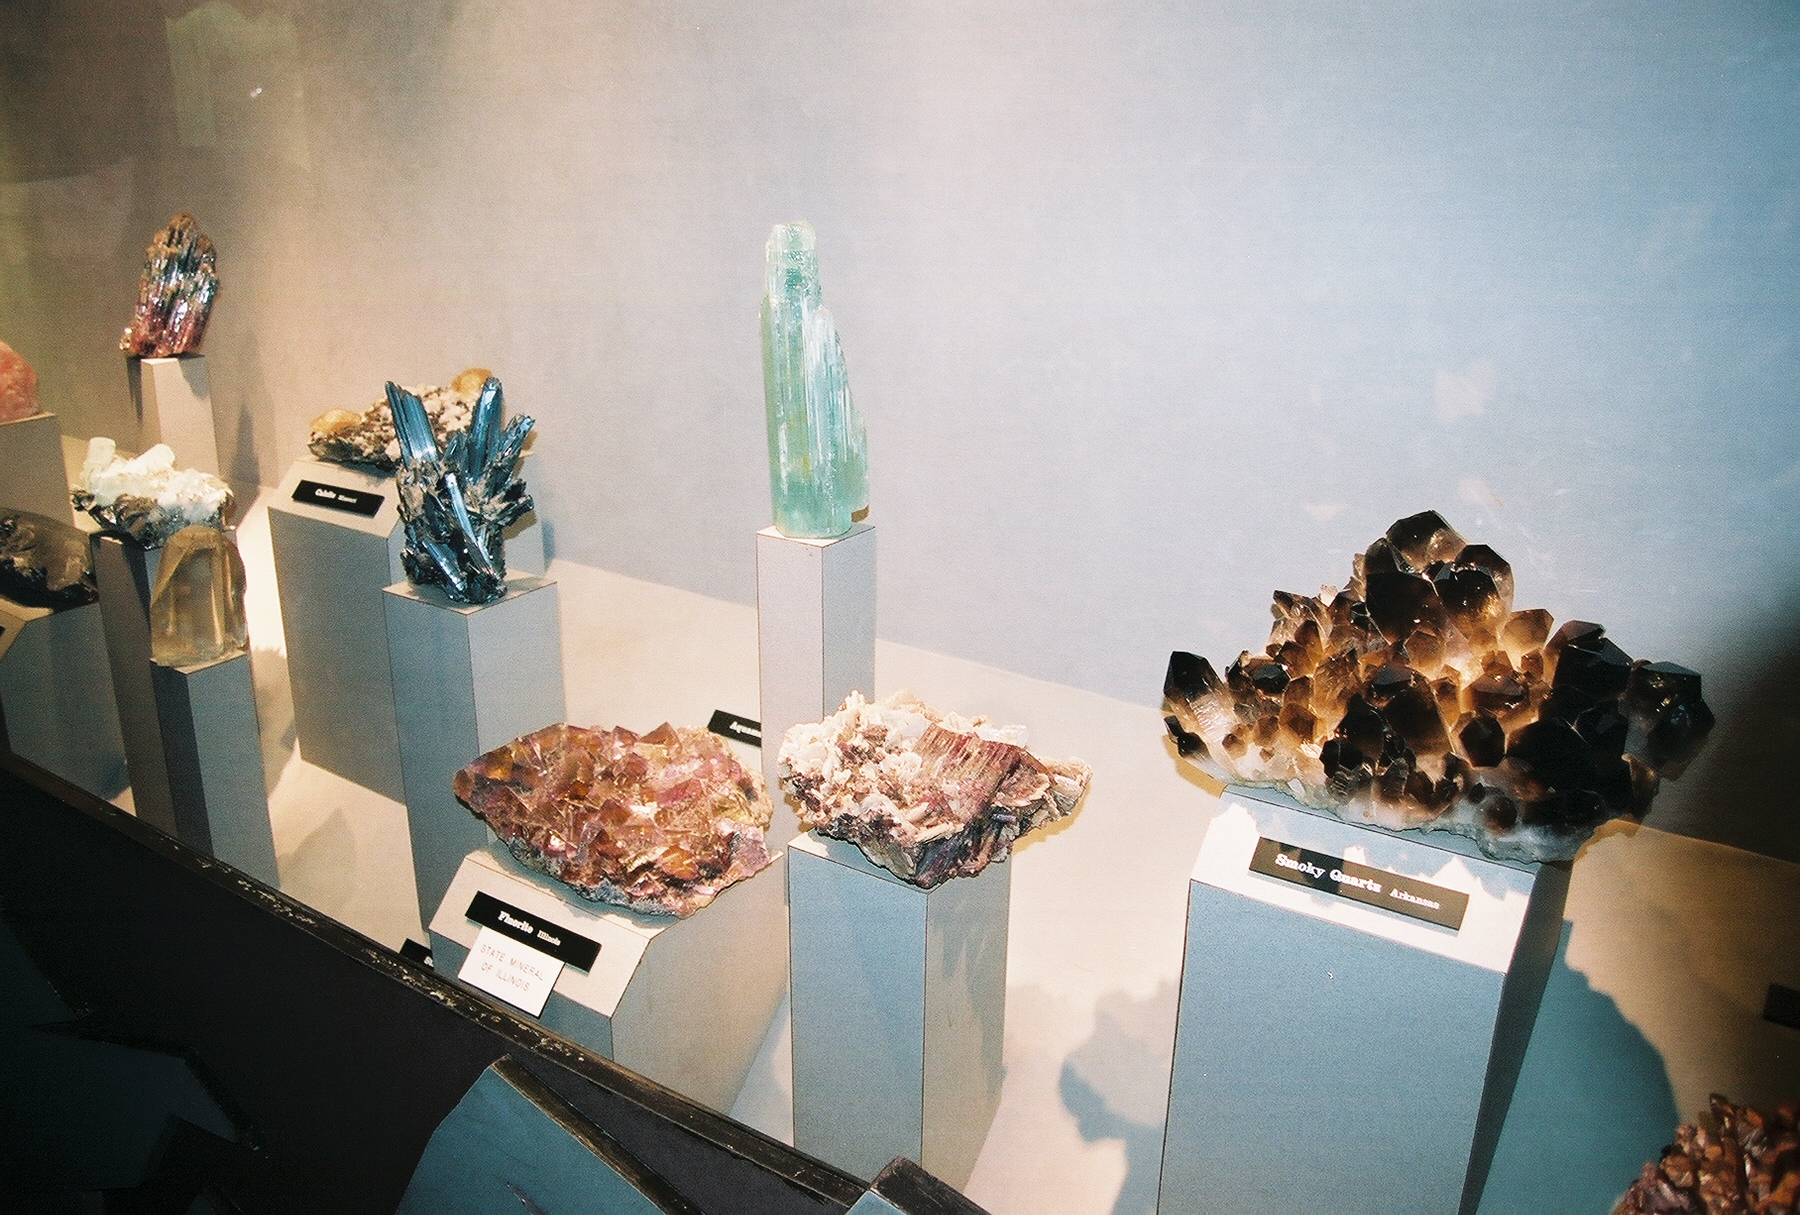 Mineral Display Lizzadro Museum of Lapidary Art